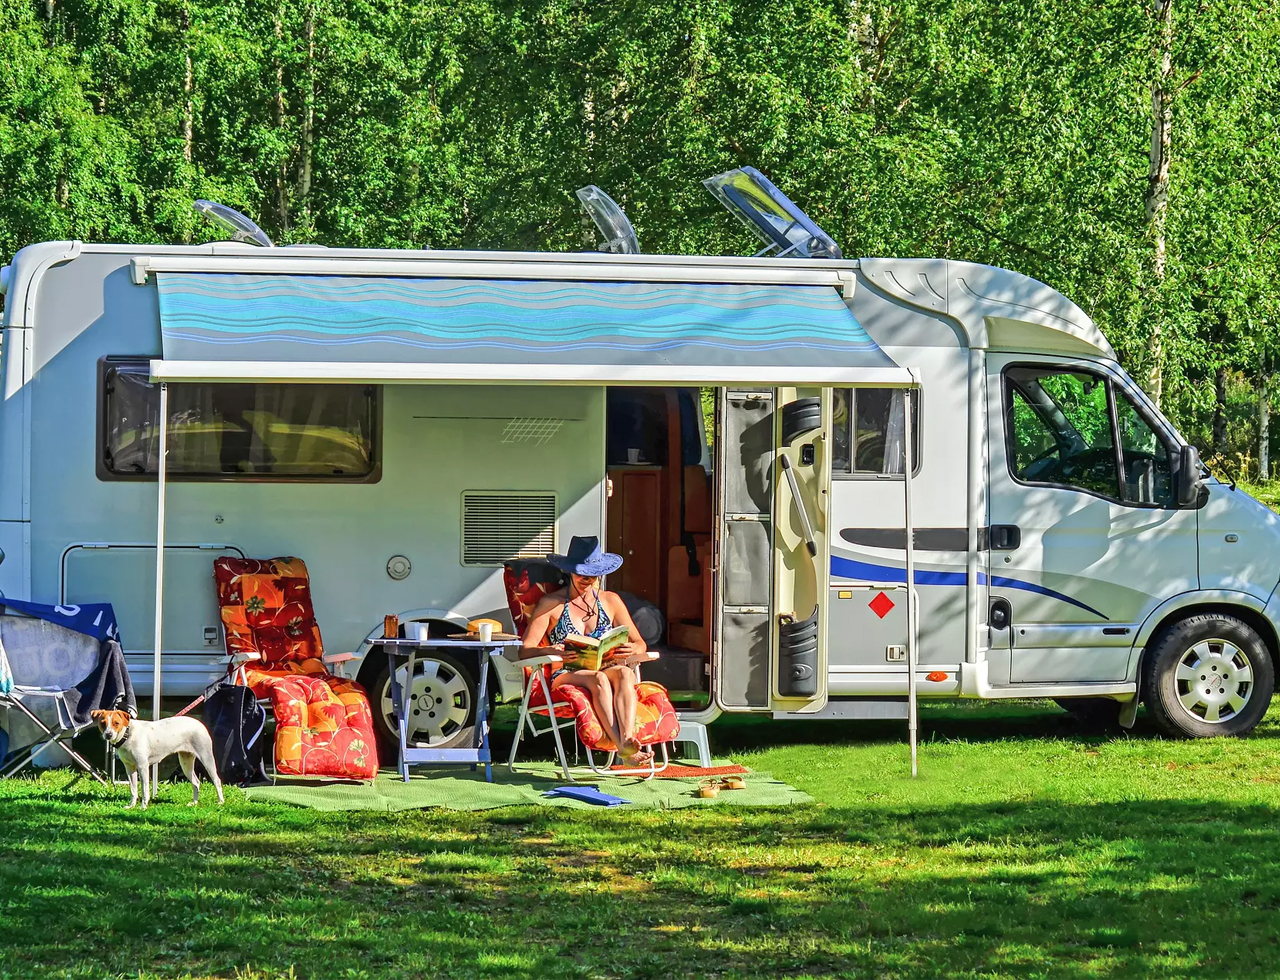 What batteries do recreational vehicles use?